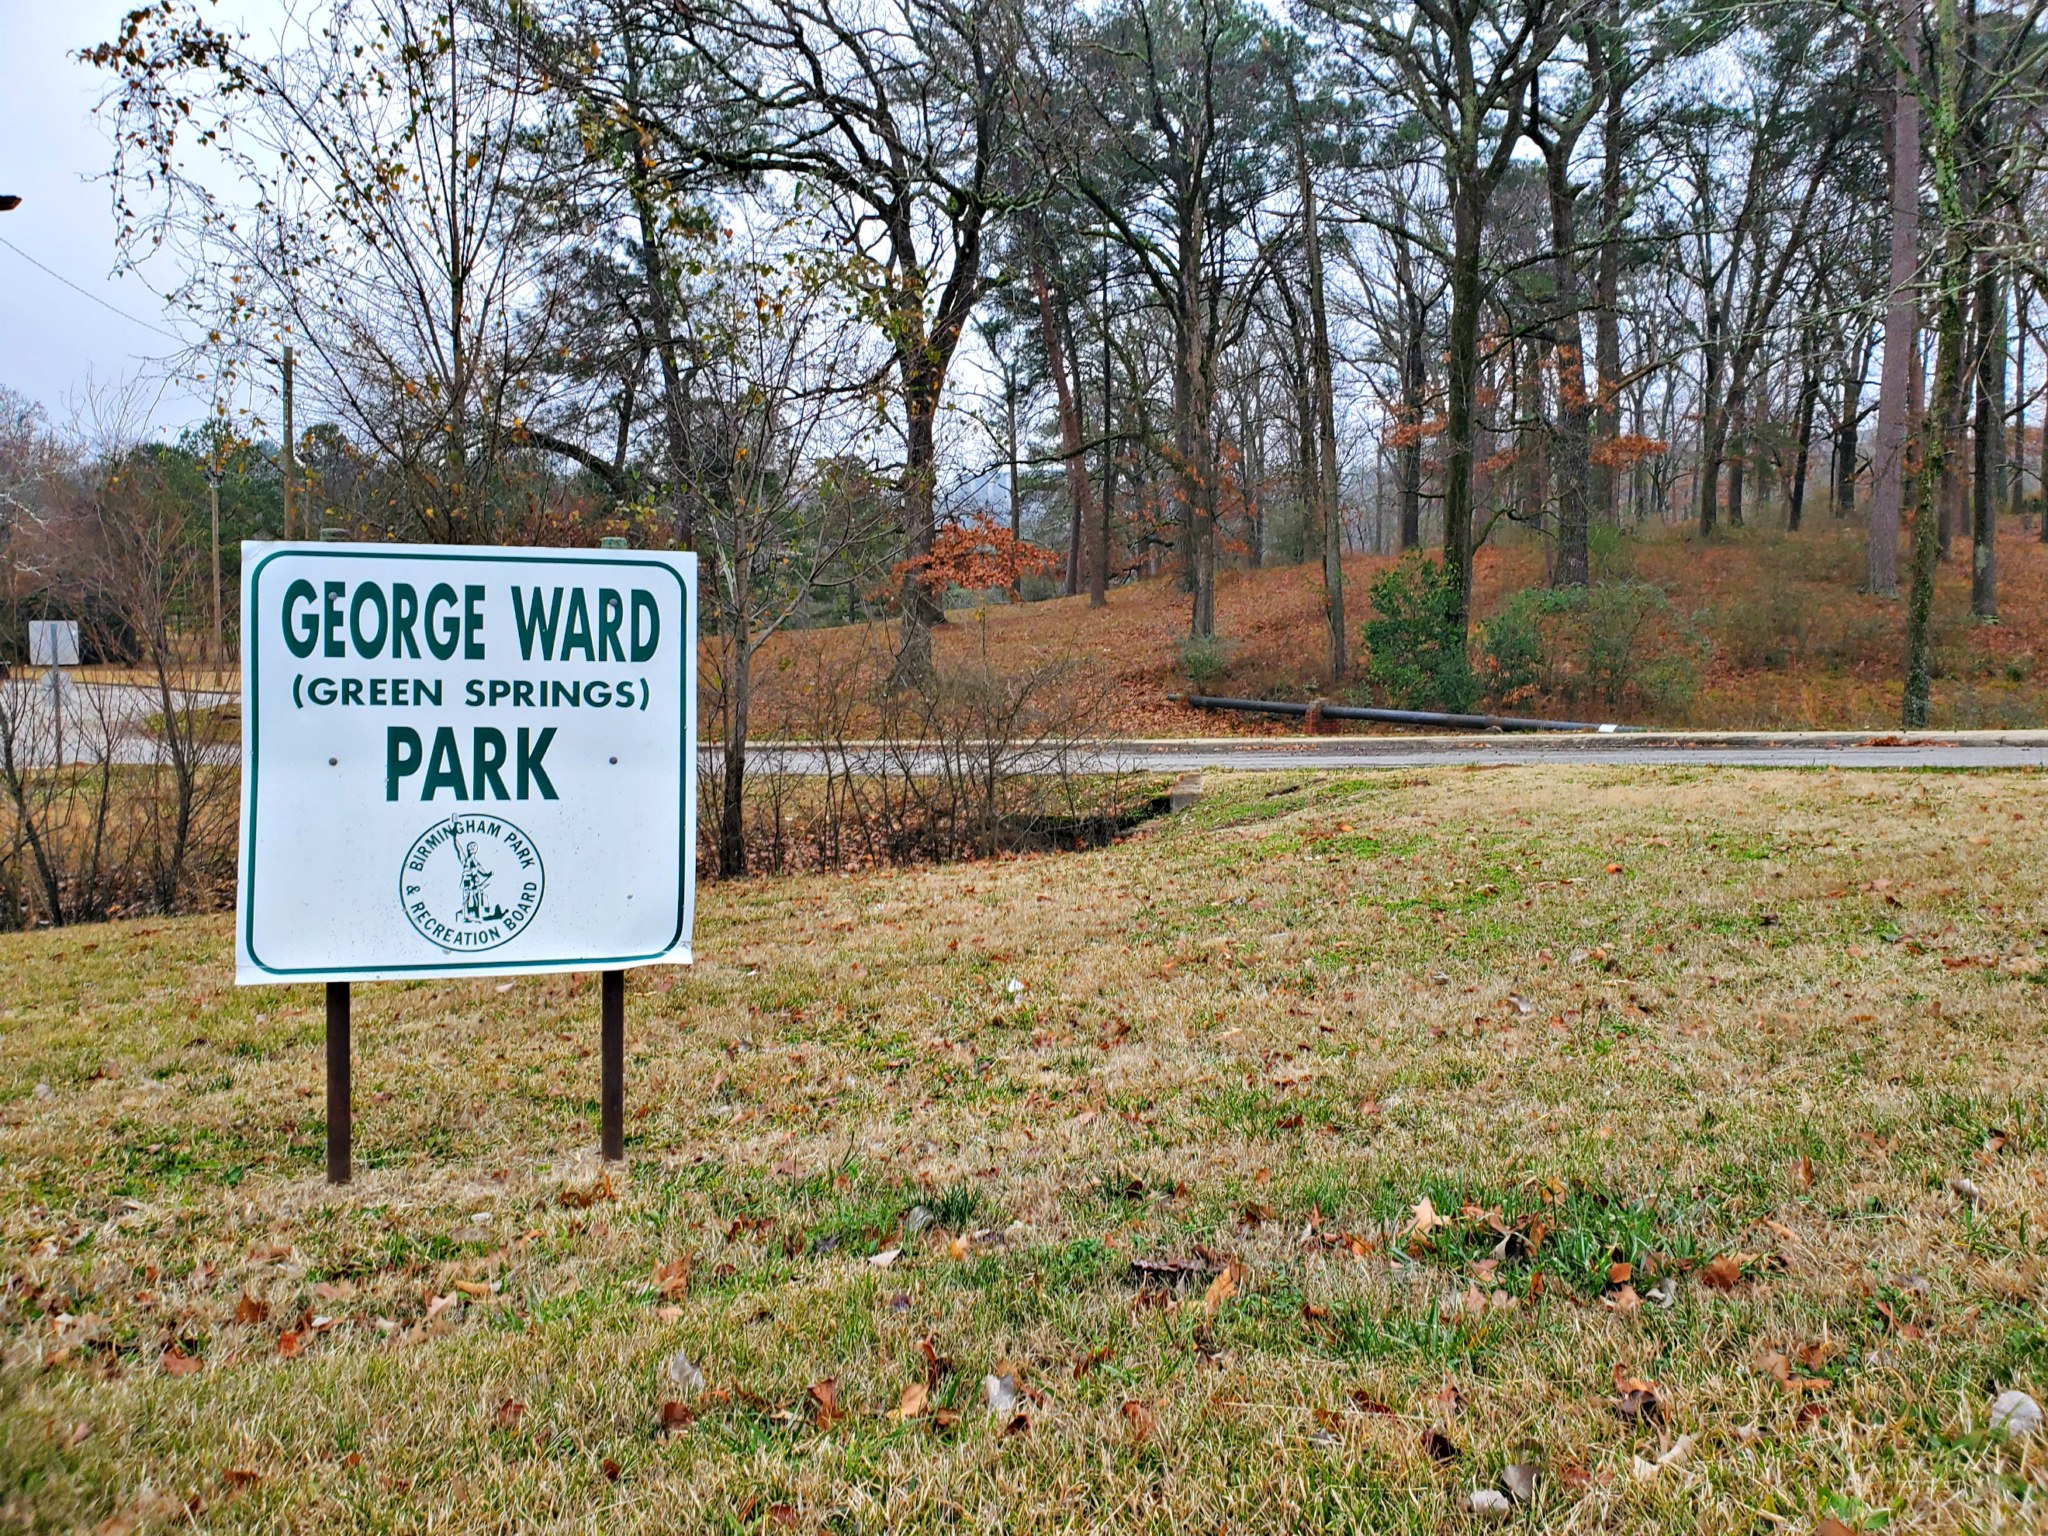 George Ward (Green Springs) Park sign and trees in Green Springs, host to the Southern Shootout